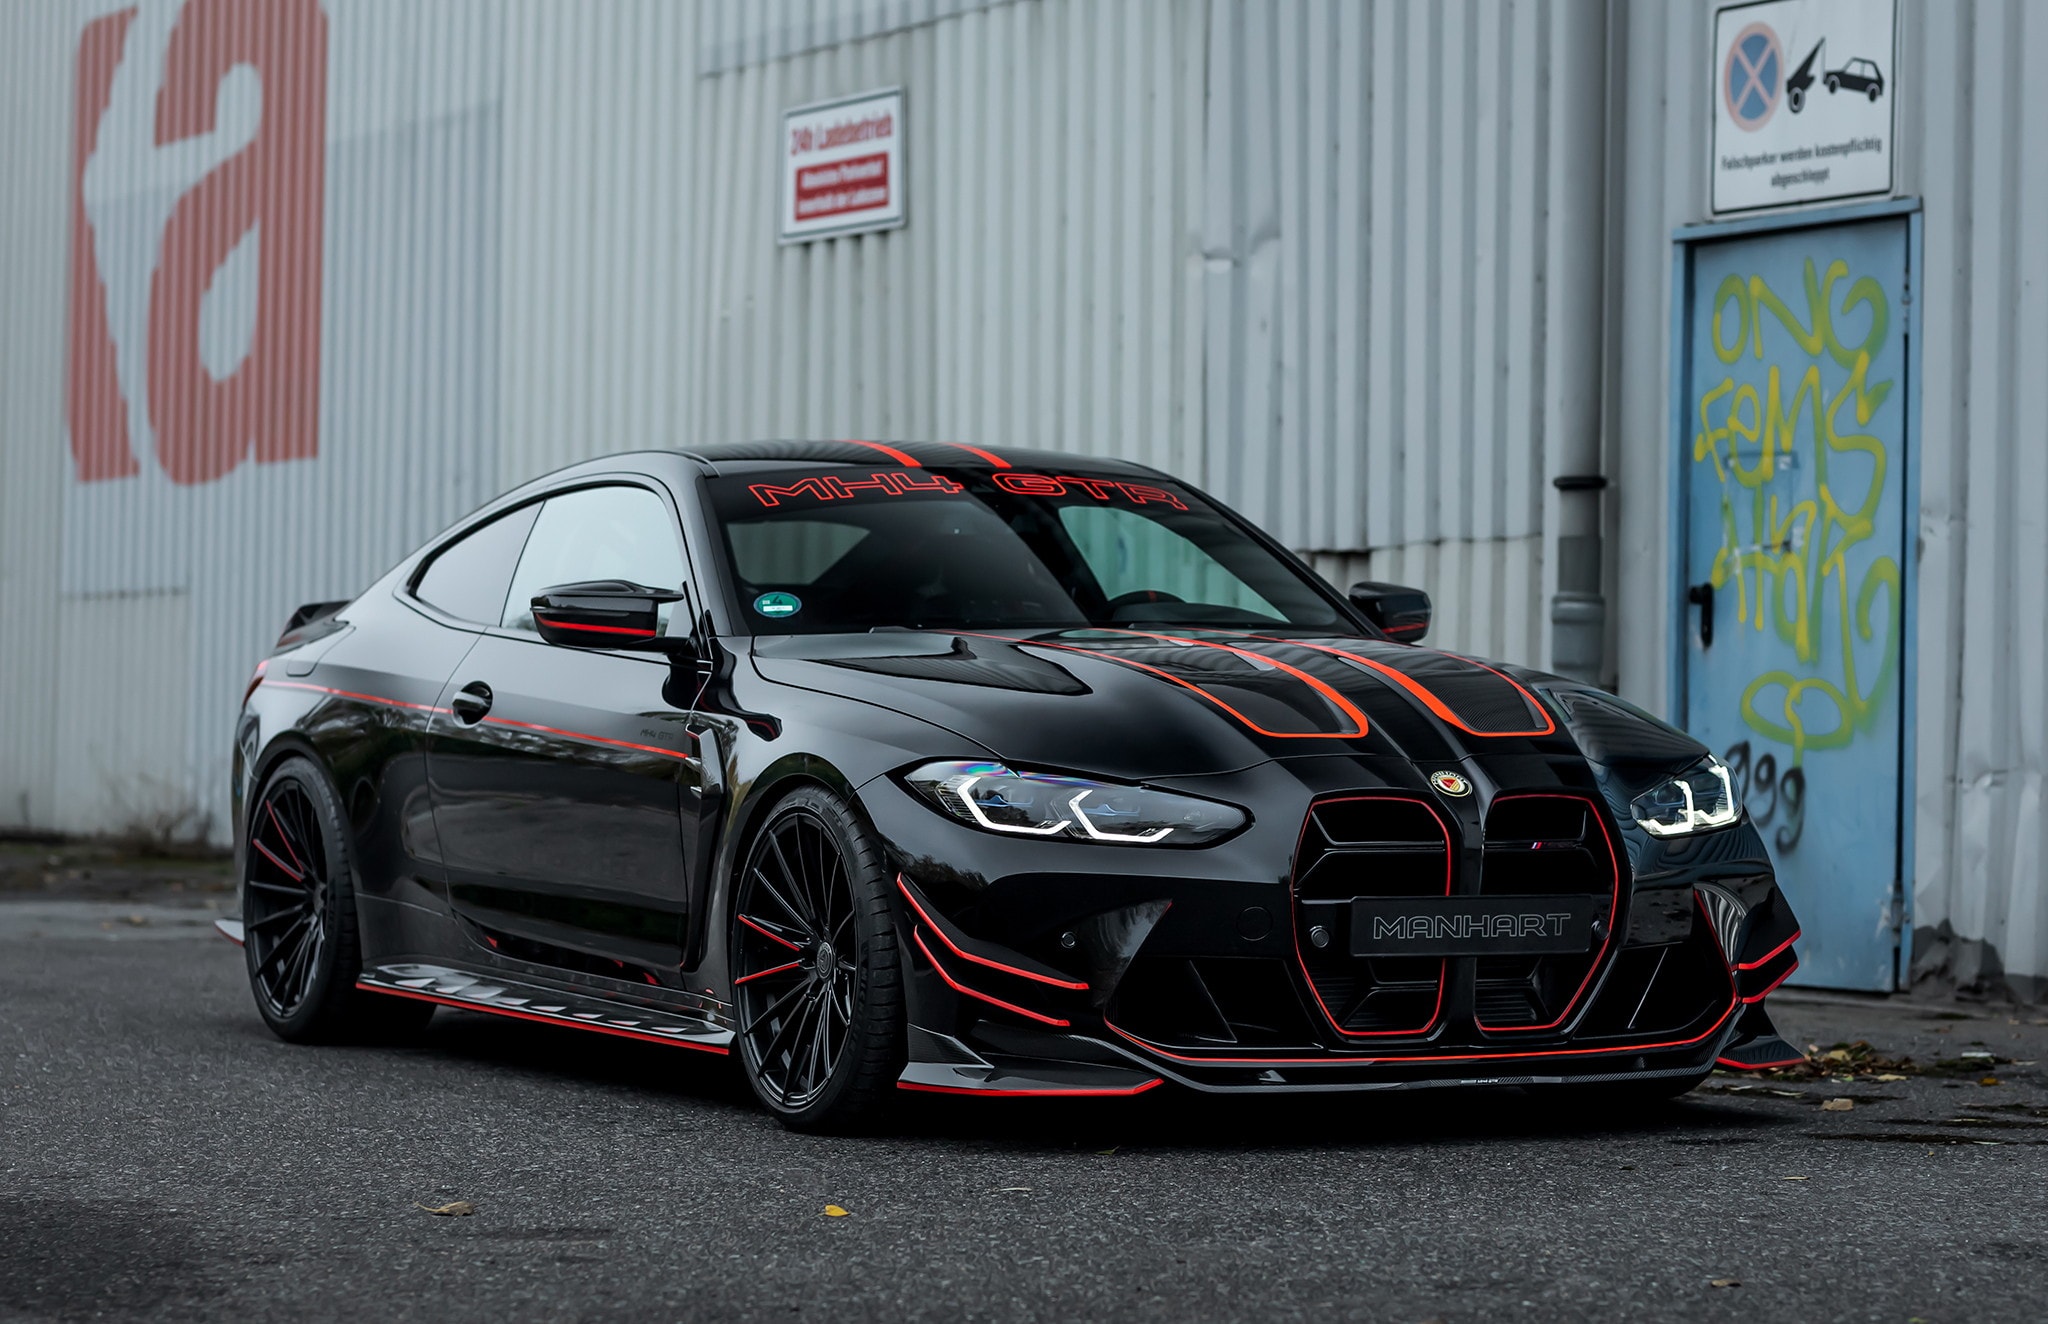 New 2023 BMW M4 CSL Enters the Tuning Arena With More Power and